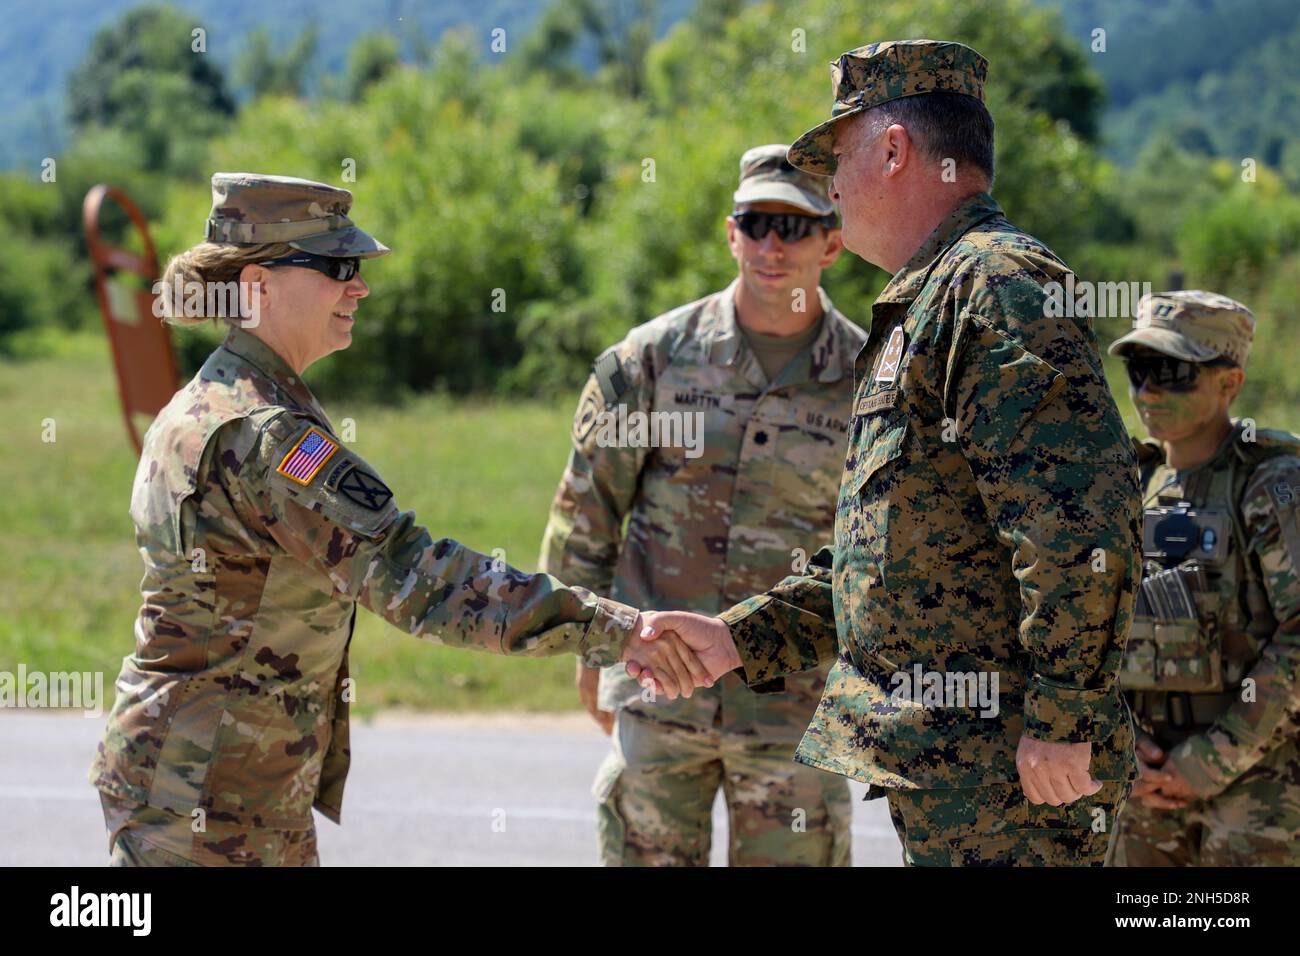 Brig. Gen. Pamela L. McGaha (left), Commander of NATO HQ Sarajevo, conducts a site visit at Kasarna Manjaca, Dobrnja, Bosnia-Herzegovina on July 17, 2022. Guard members assigned to the State Medical Detachment and 1-169th Aviation Regiment, Maryland Army National Guard, trained alongside active duty Soldiers from the 1st Squadron, 91st Cavalry Regiment, 173rd Airborne Brigade, 12th Combat Aviation Brigade, and the Armed Forces of Bosnia and Herzegovina soldiers in tactics, aviation, medical, and non-commissioned officer development. The Maryland National Guard will celebrate 20 years of partne Stock Photo